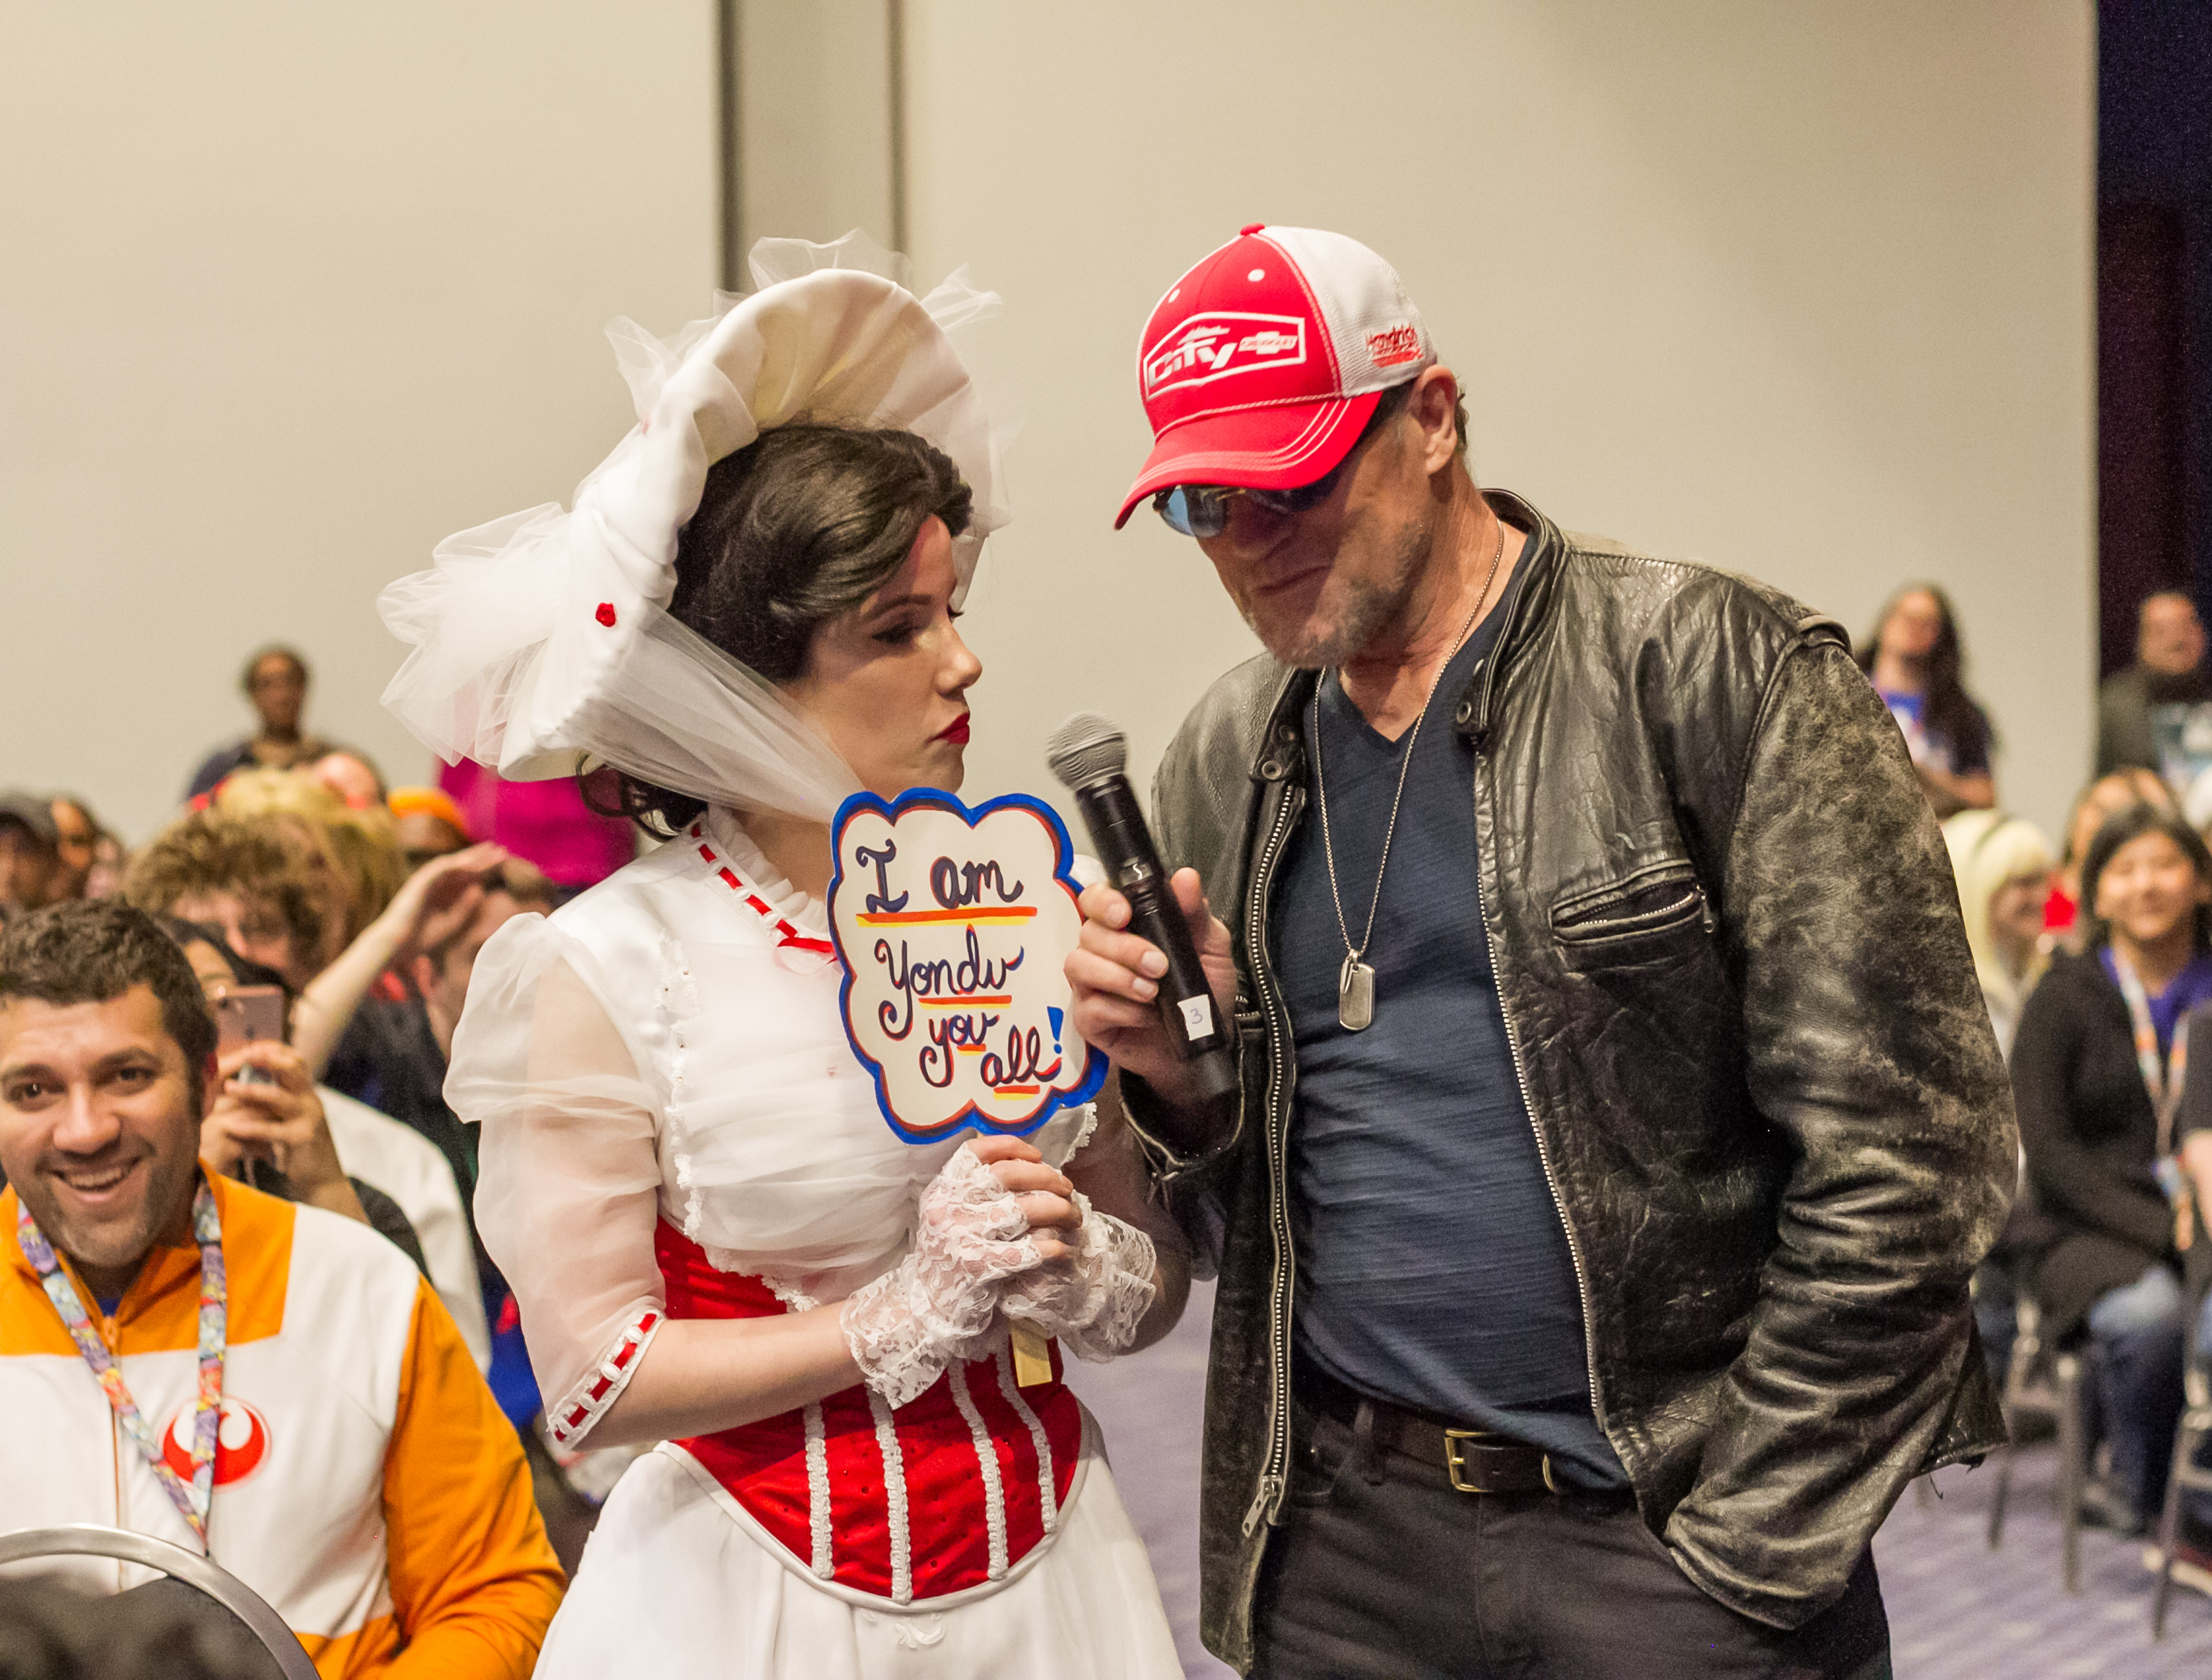 Michael Rooker at Awesome Con 2018